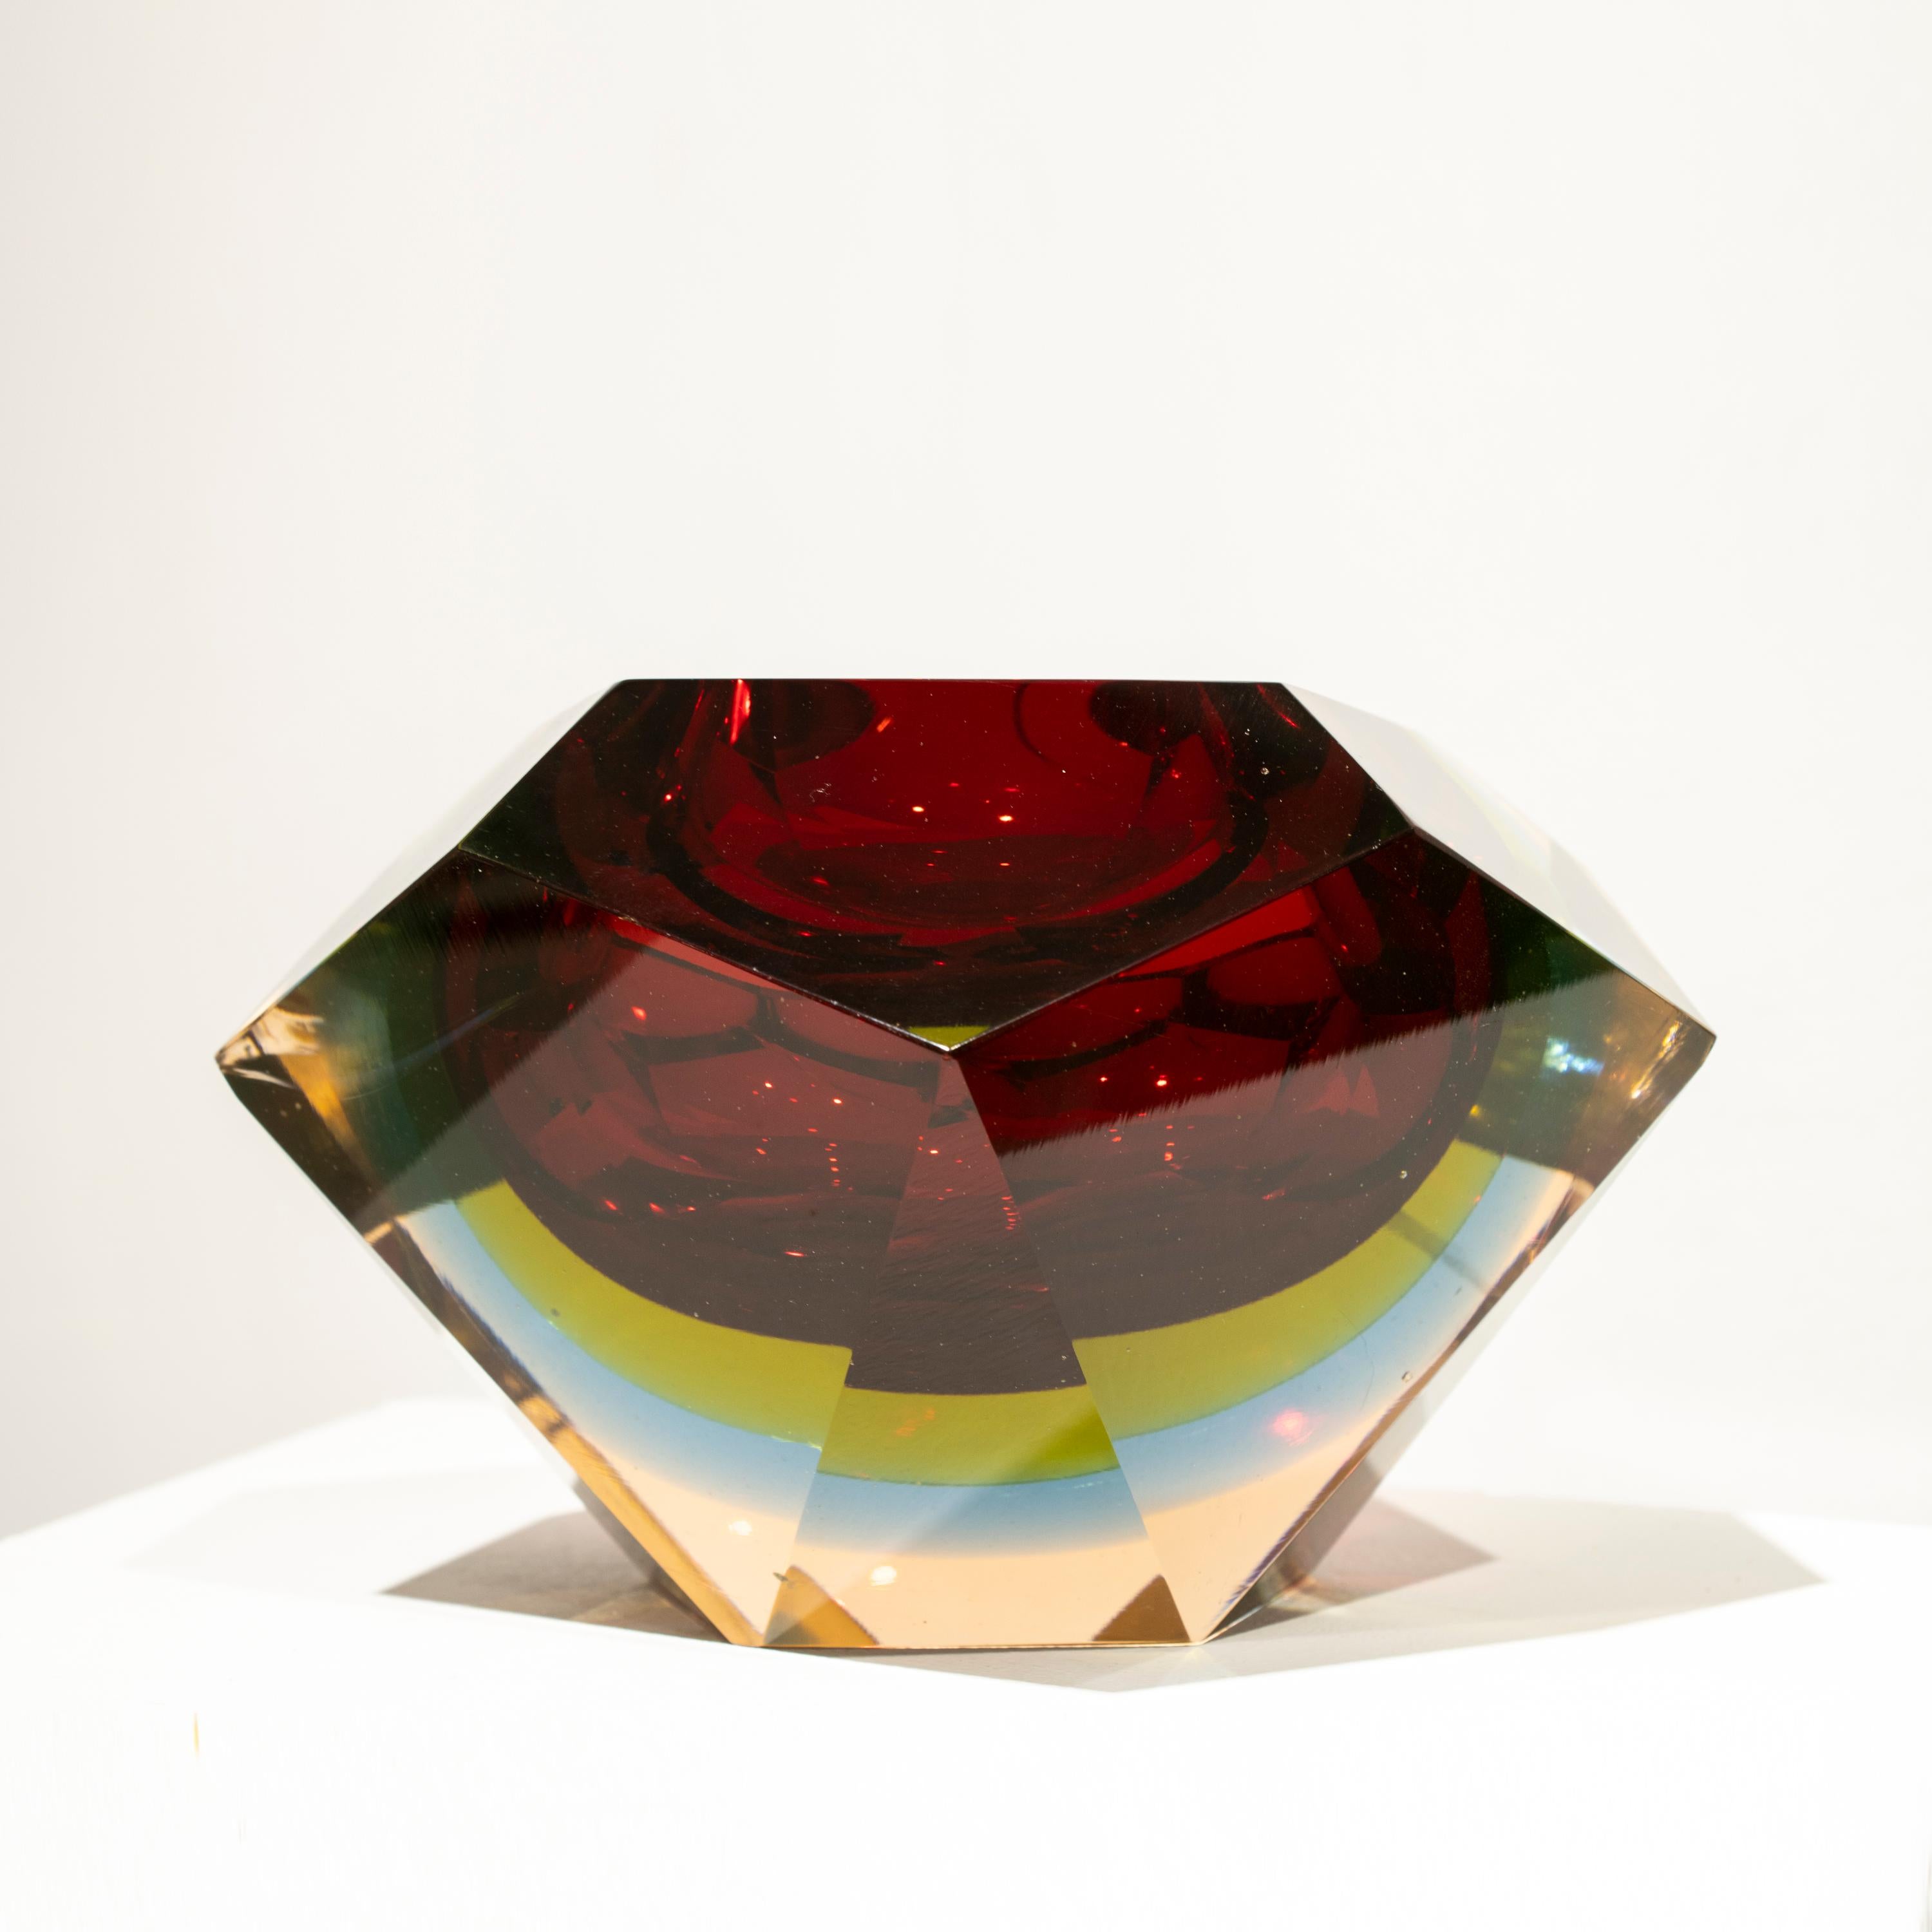 Flavio Poli Hand-Crafted Red Murano Vase, Italy, 1970 For Sale 1